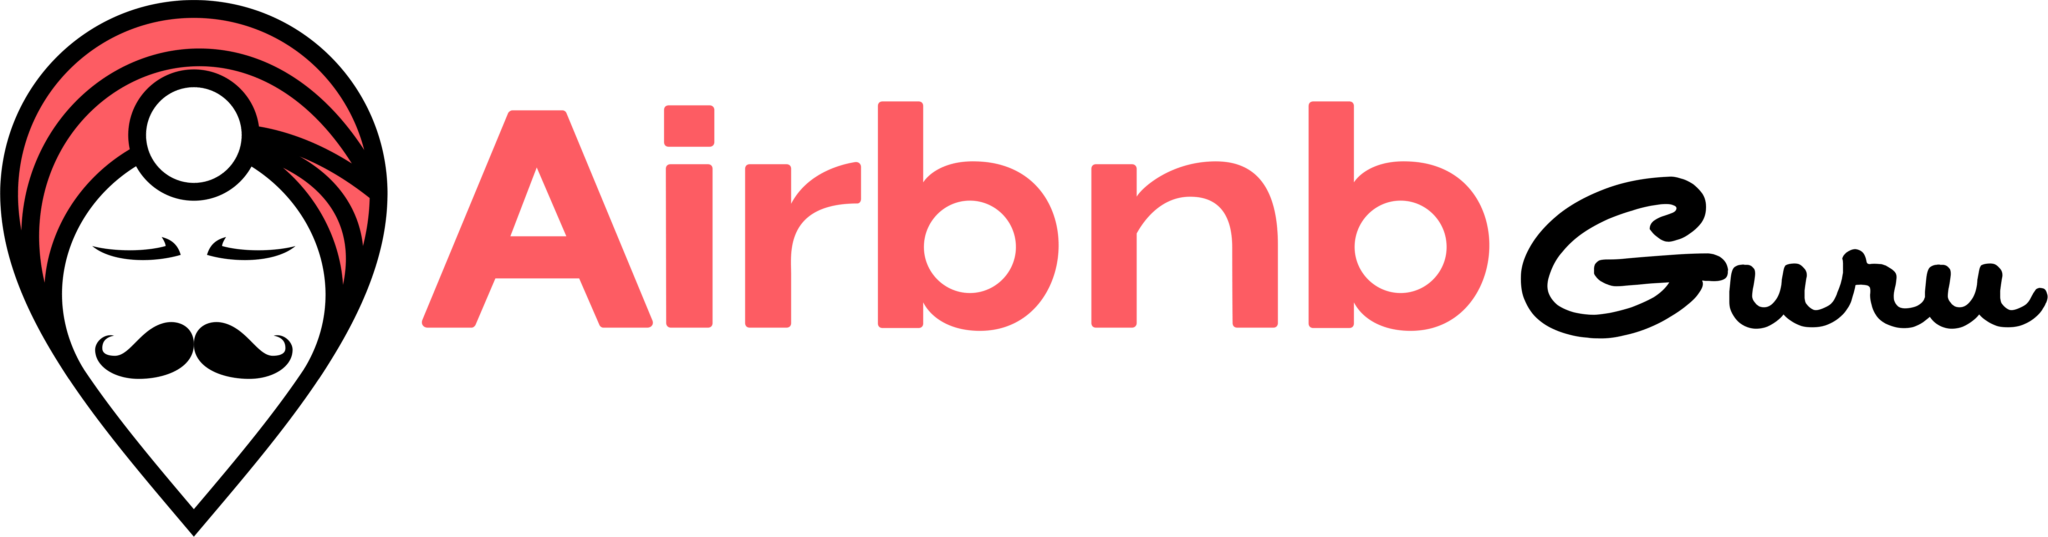 Official Airbnb Logo - Airbnb House Rental: Asking your Landlord for Permission - Airbnb Guru